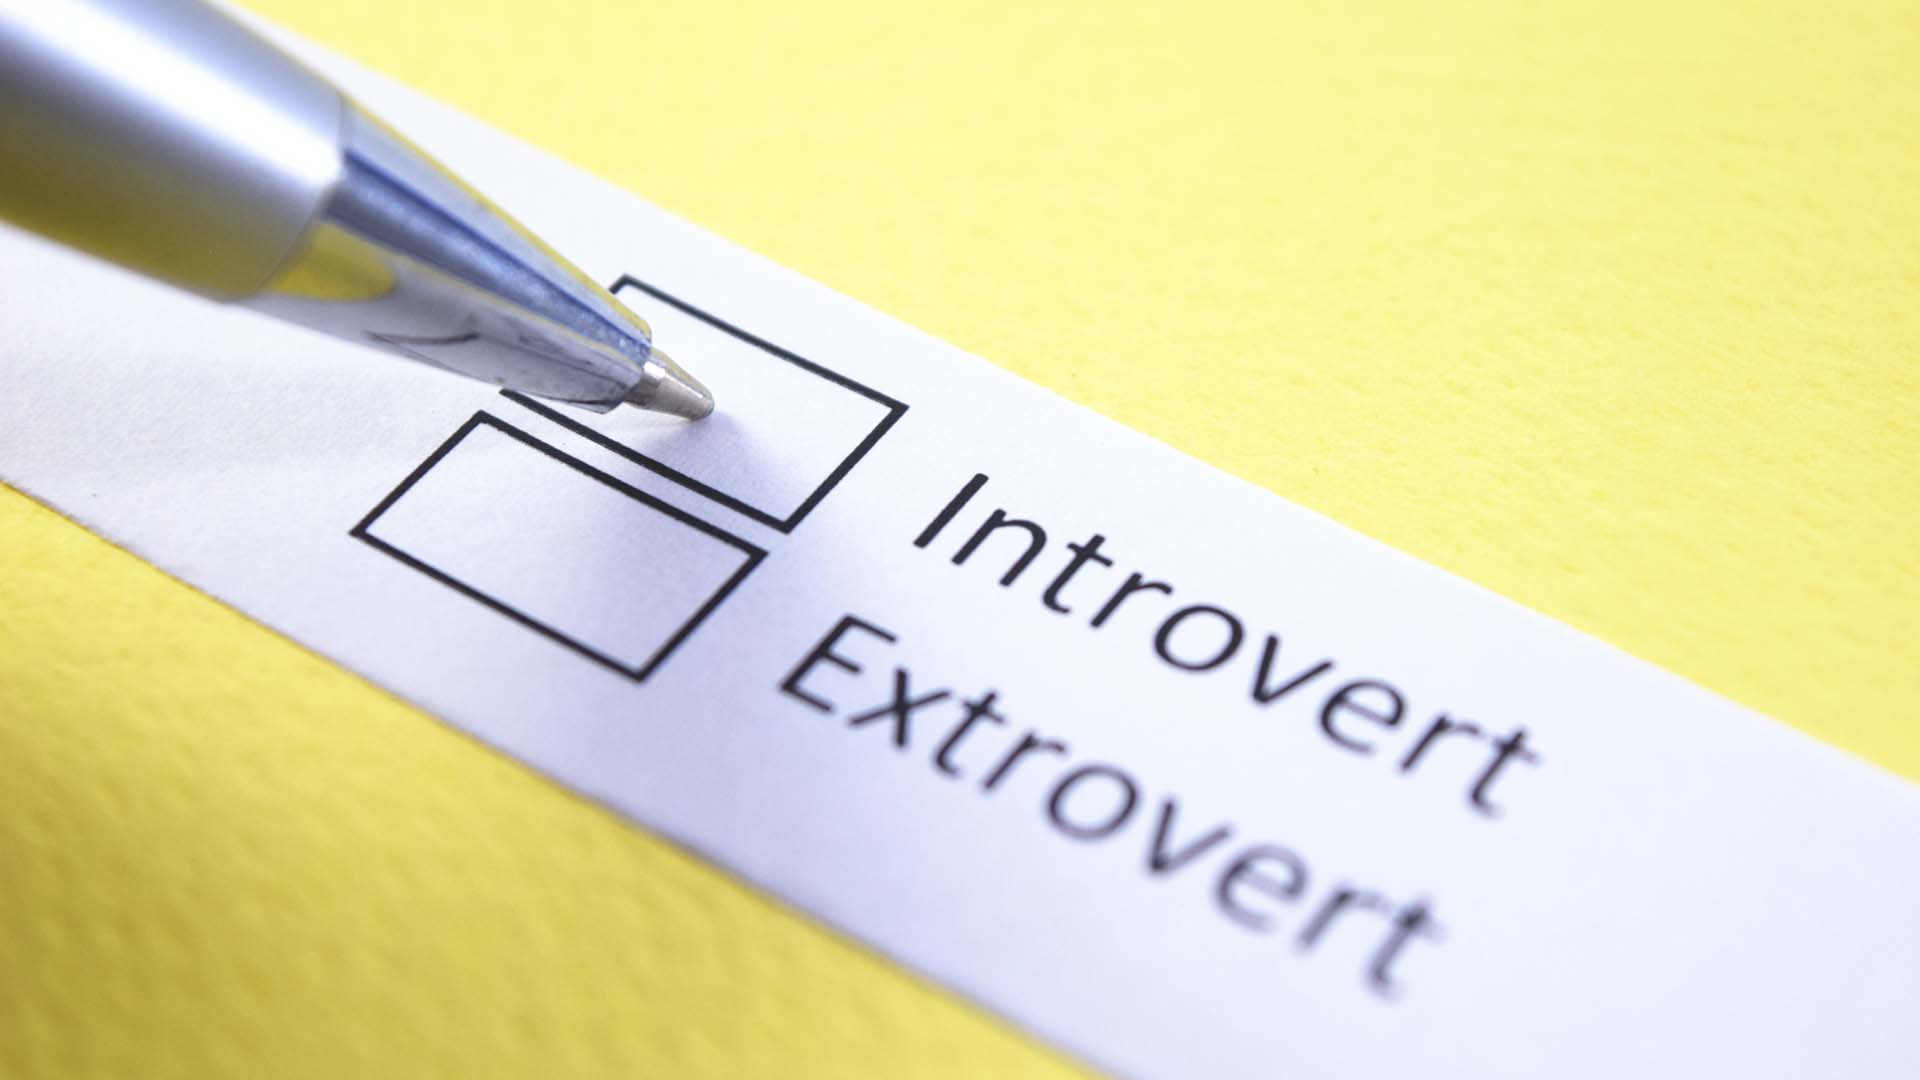 Whether you're an introvert or extrovert can help you find the right social connections